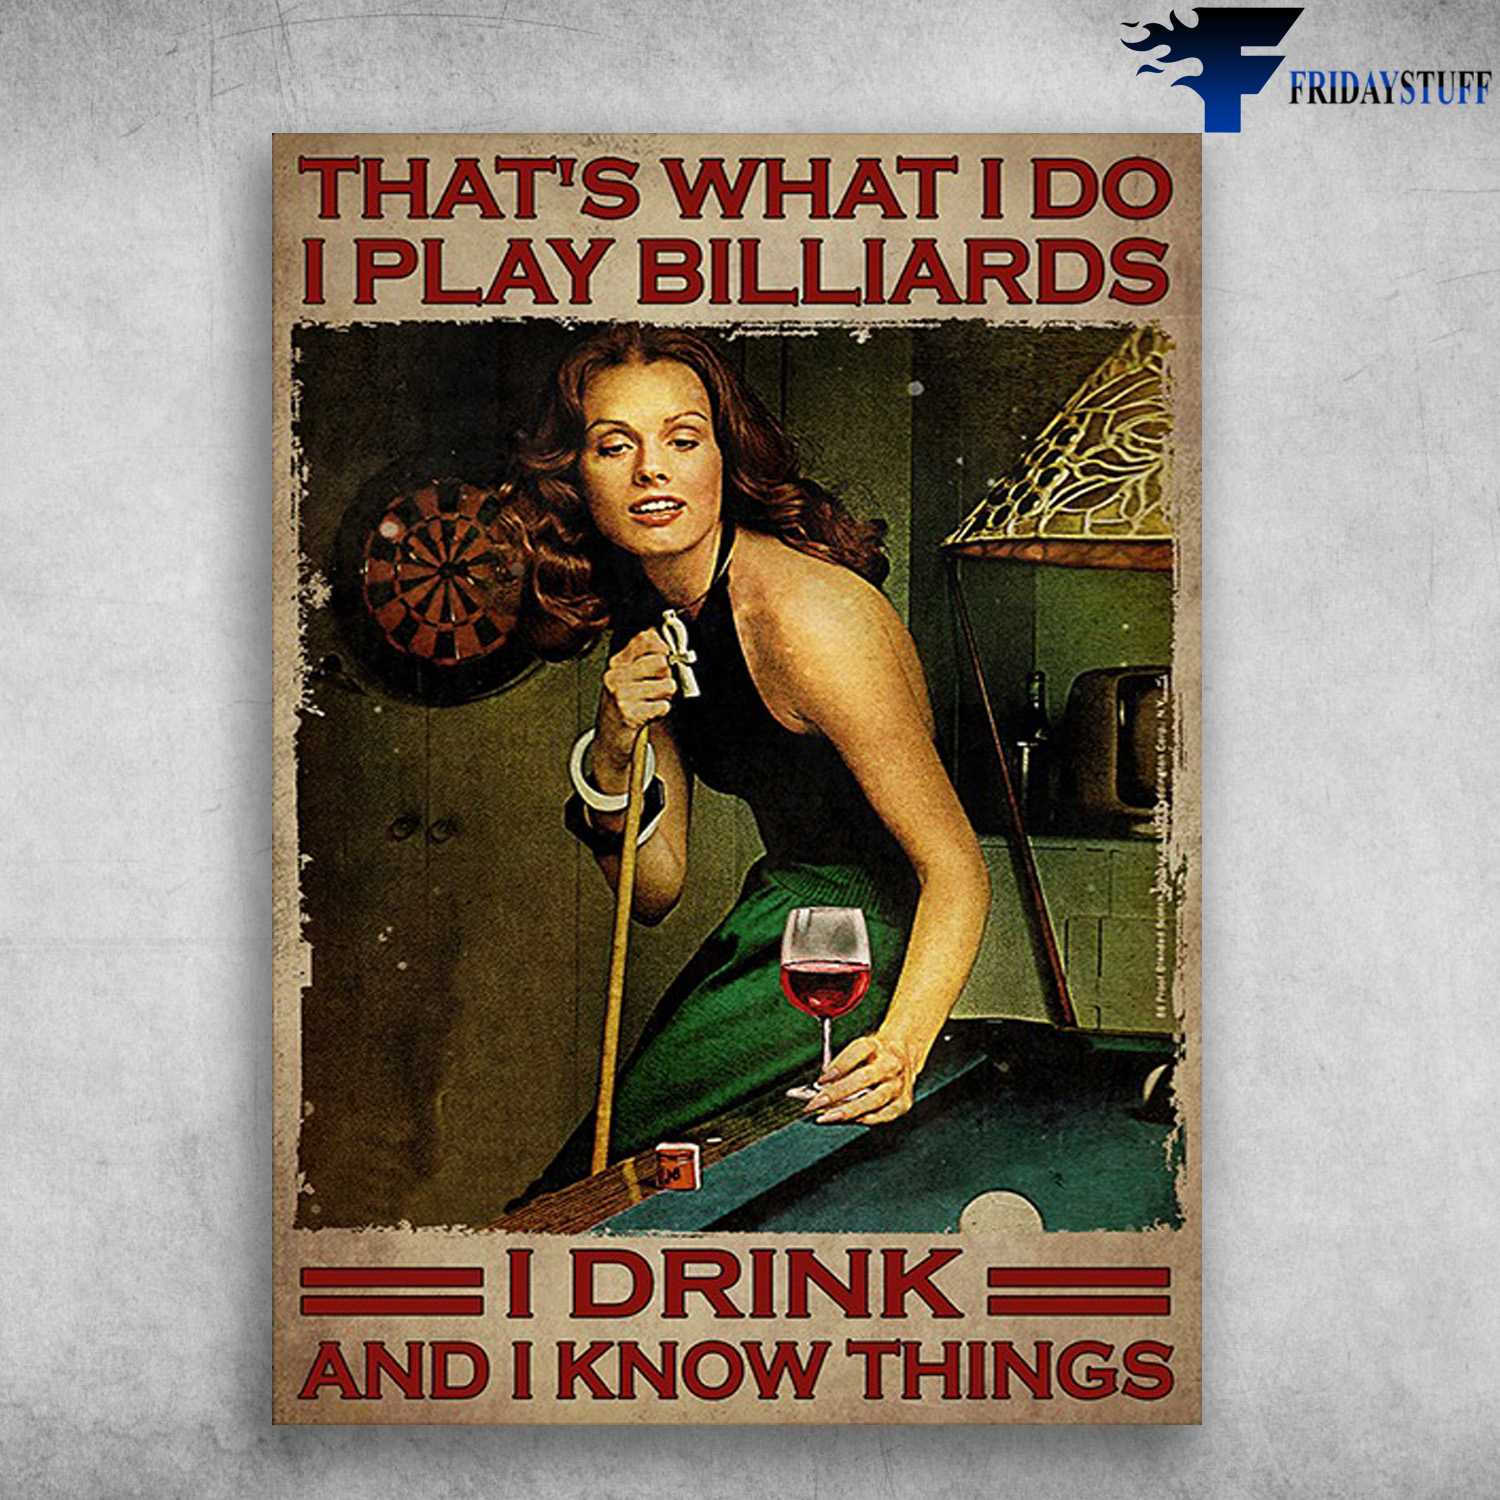 Billiards And Wine - That's What I Do, I Play Billiards, I Drink, And I Know Things